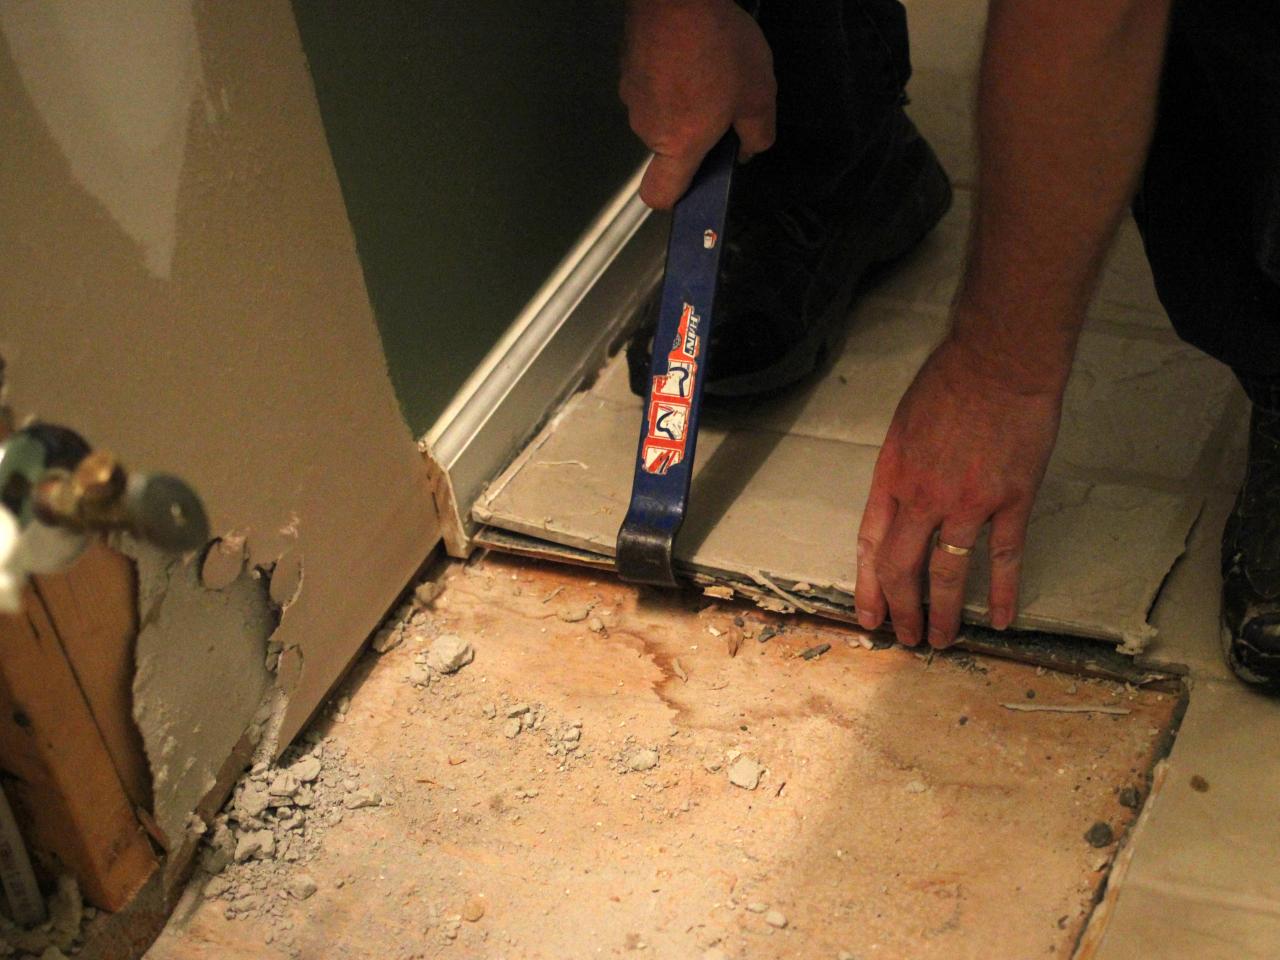 How To Remove A Tile Floor, How To Remove Ceramic Tile Adhesive From Concrete Floor